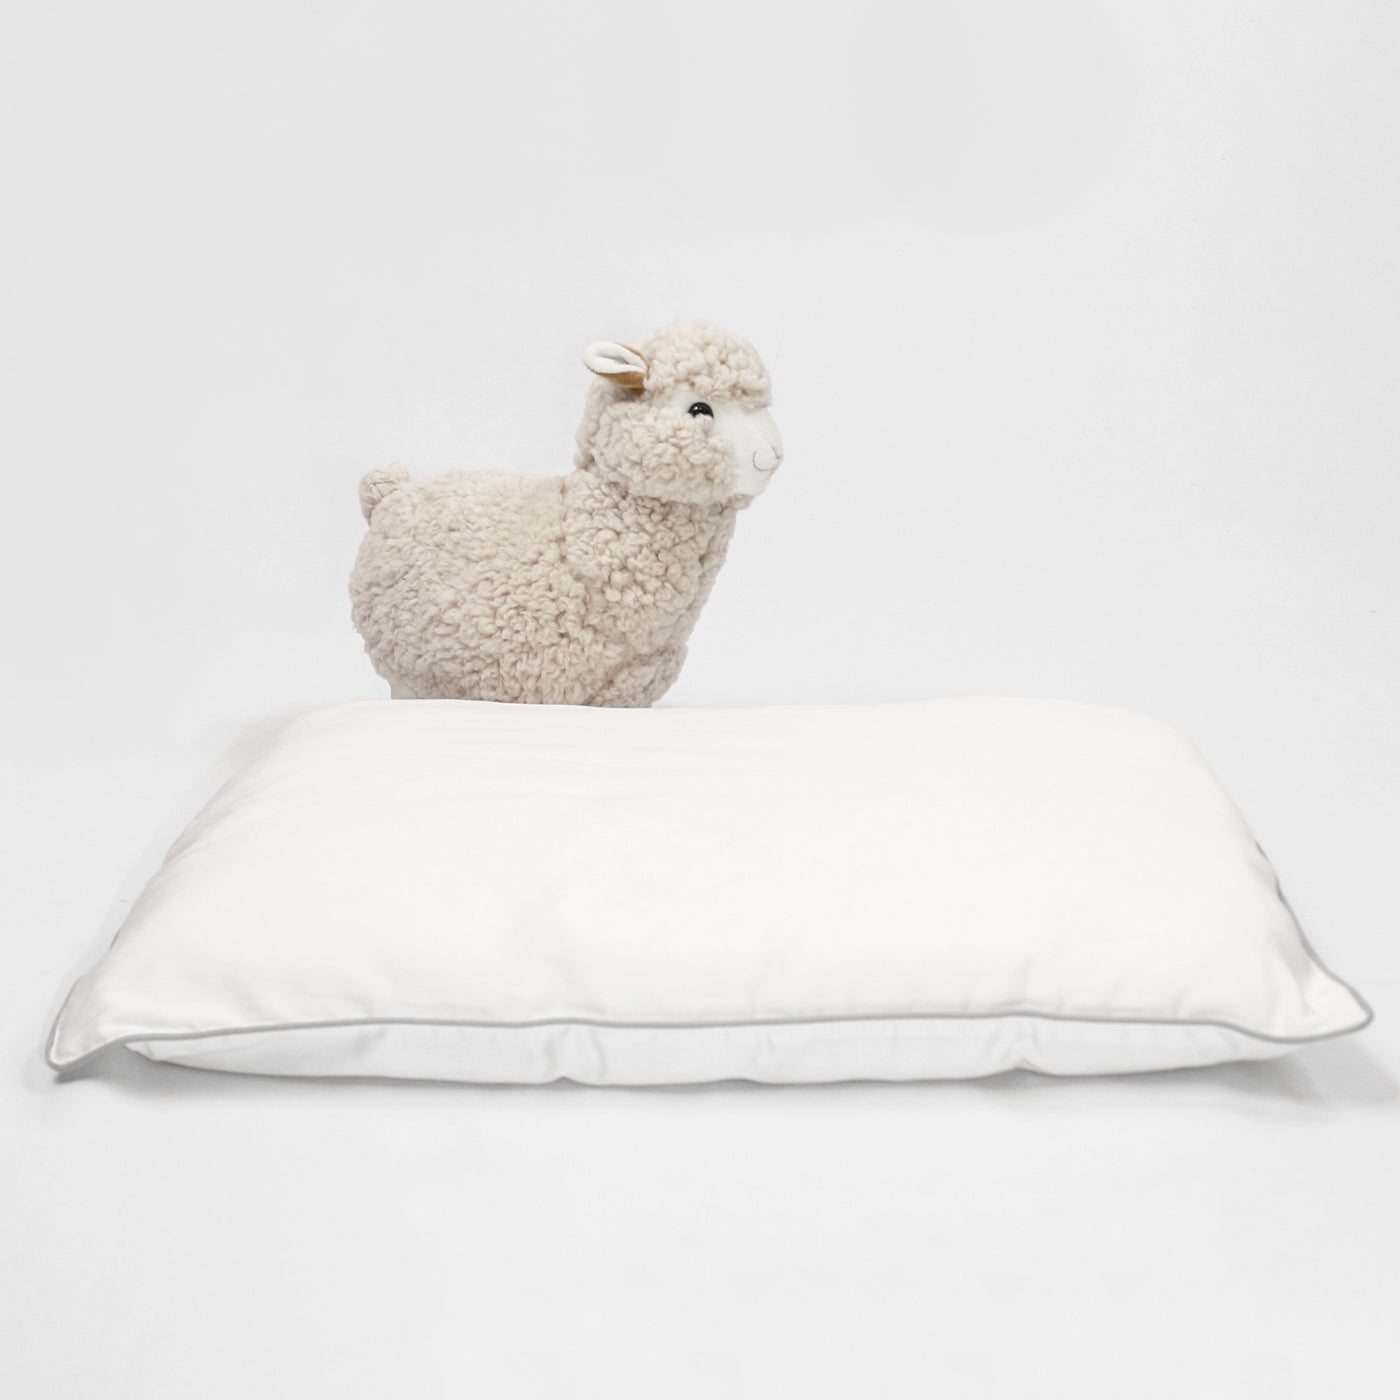 Wool Pillow, Toddler and Kids, Size: 14"x19"